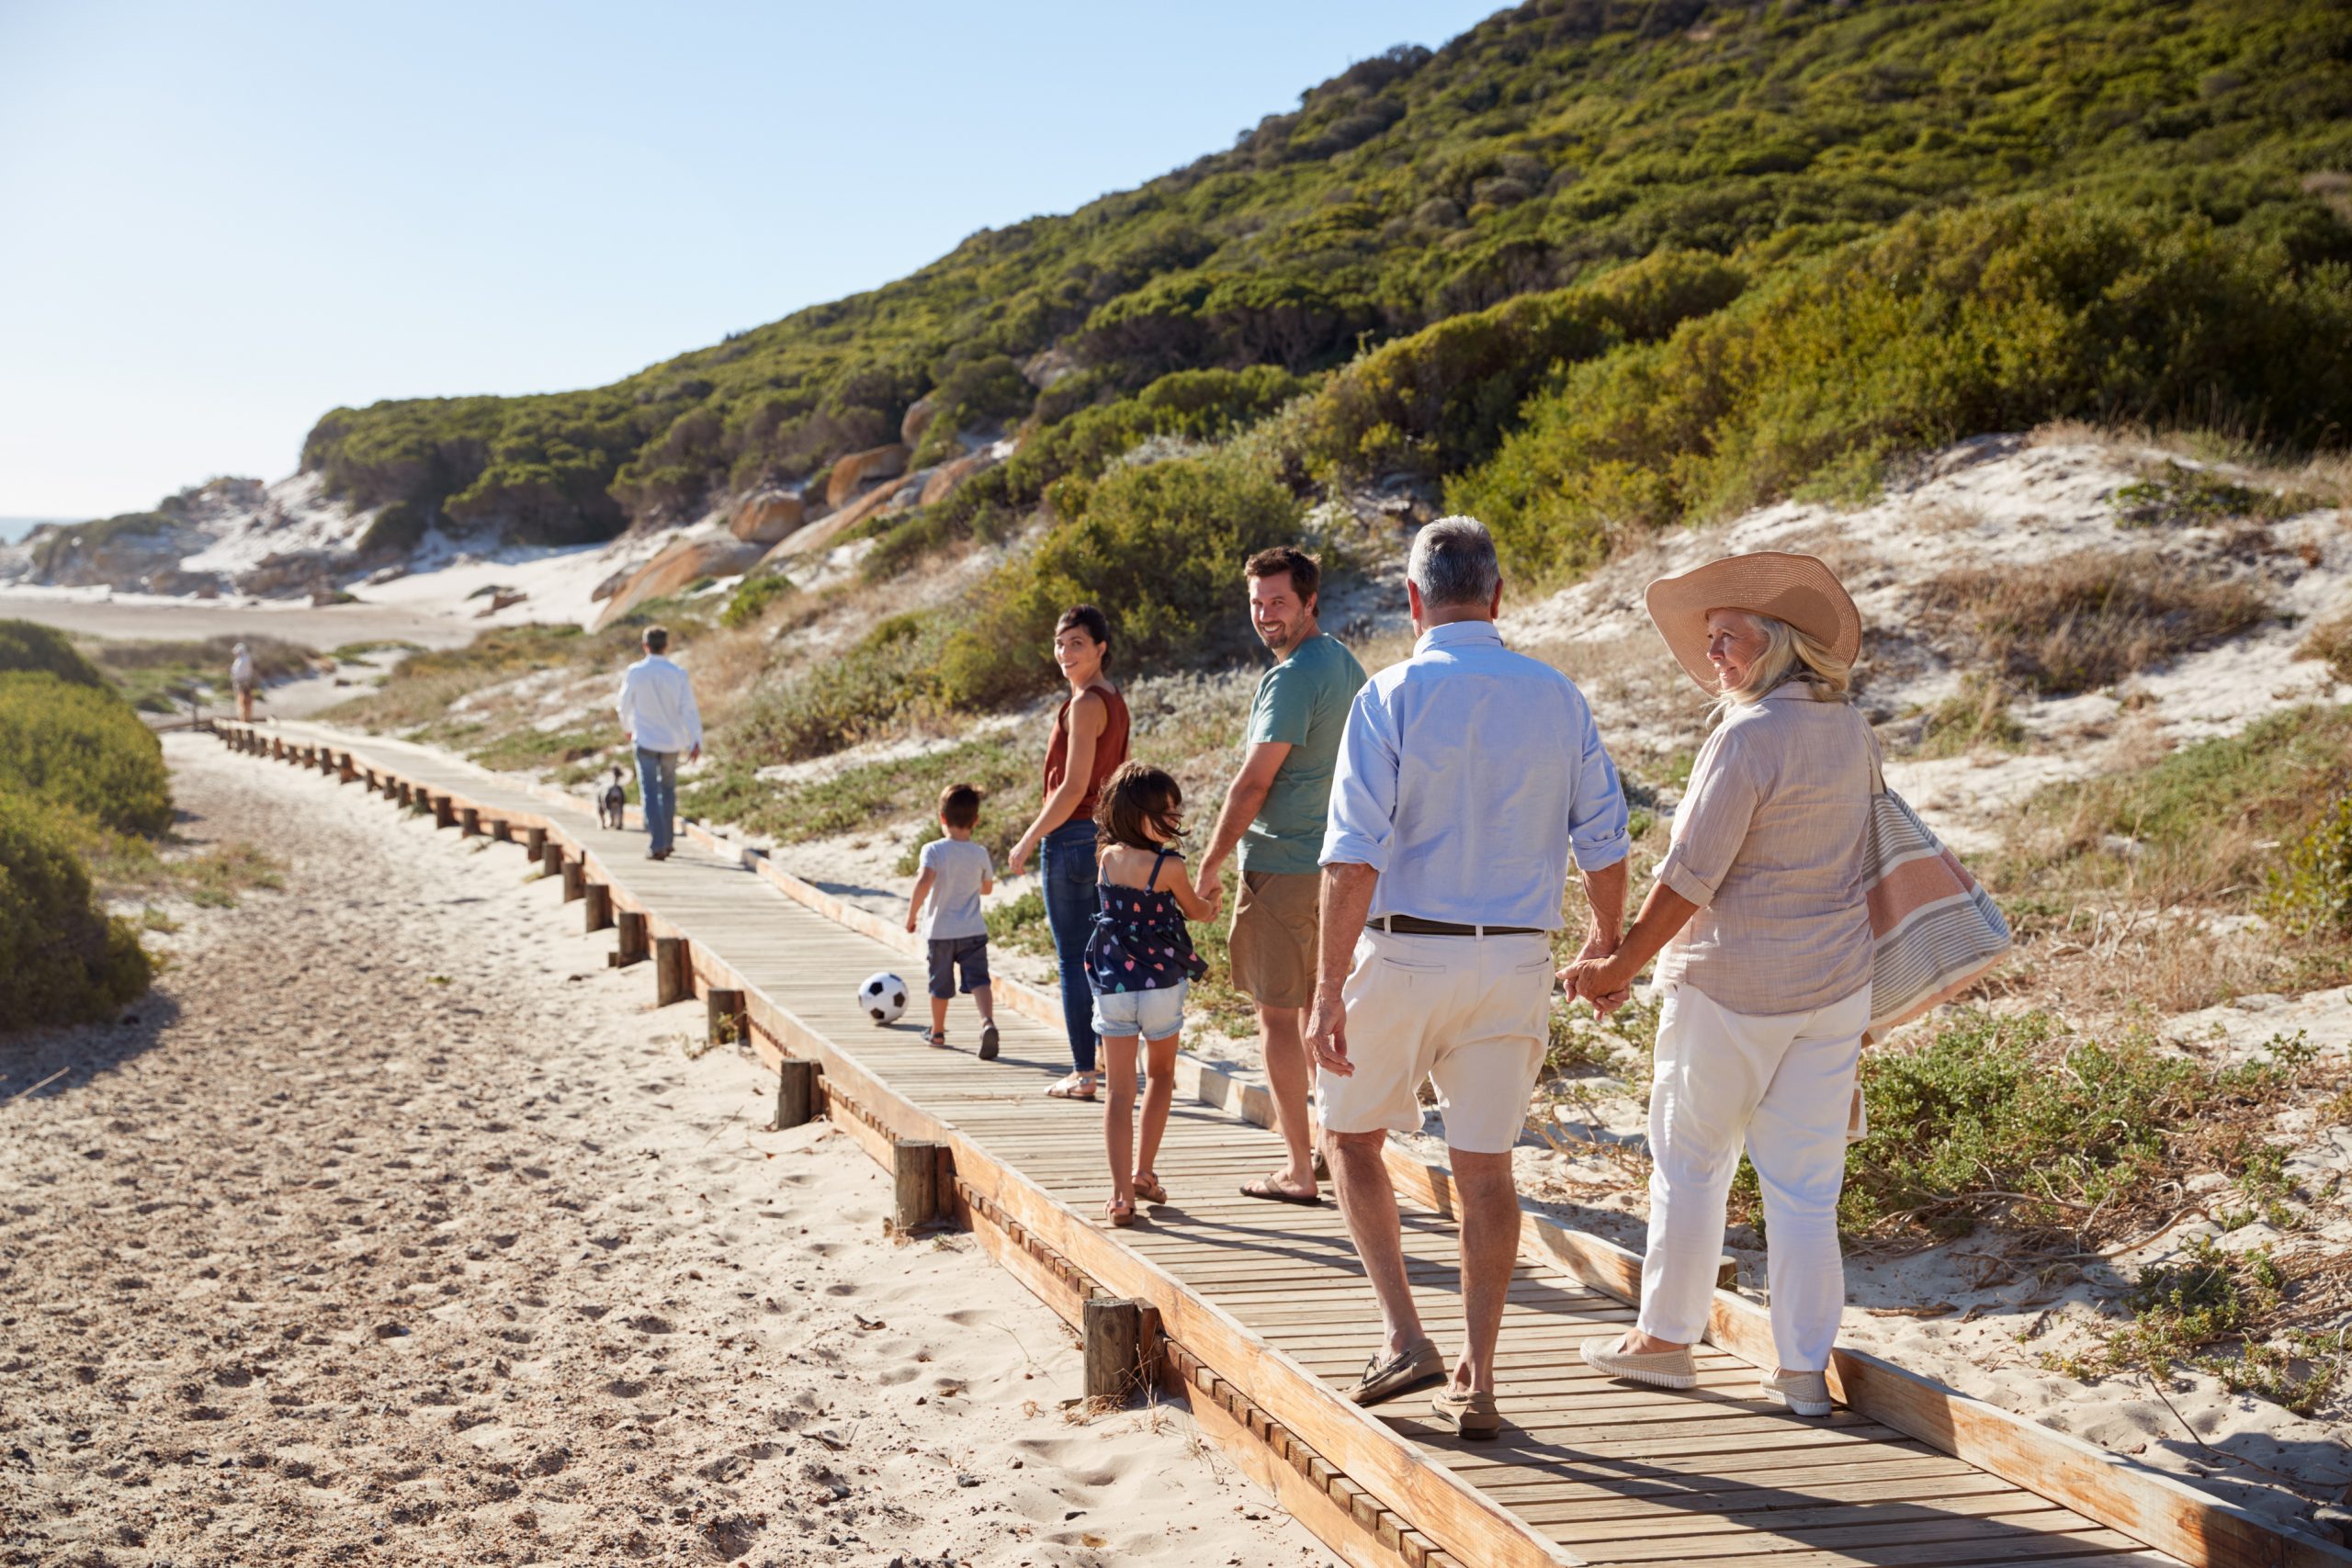 Three generation white family walking together along a wooden promenade on a beach, full length